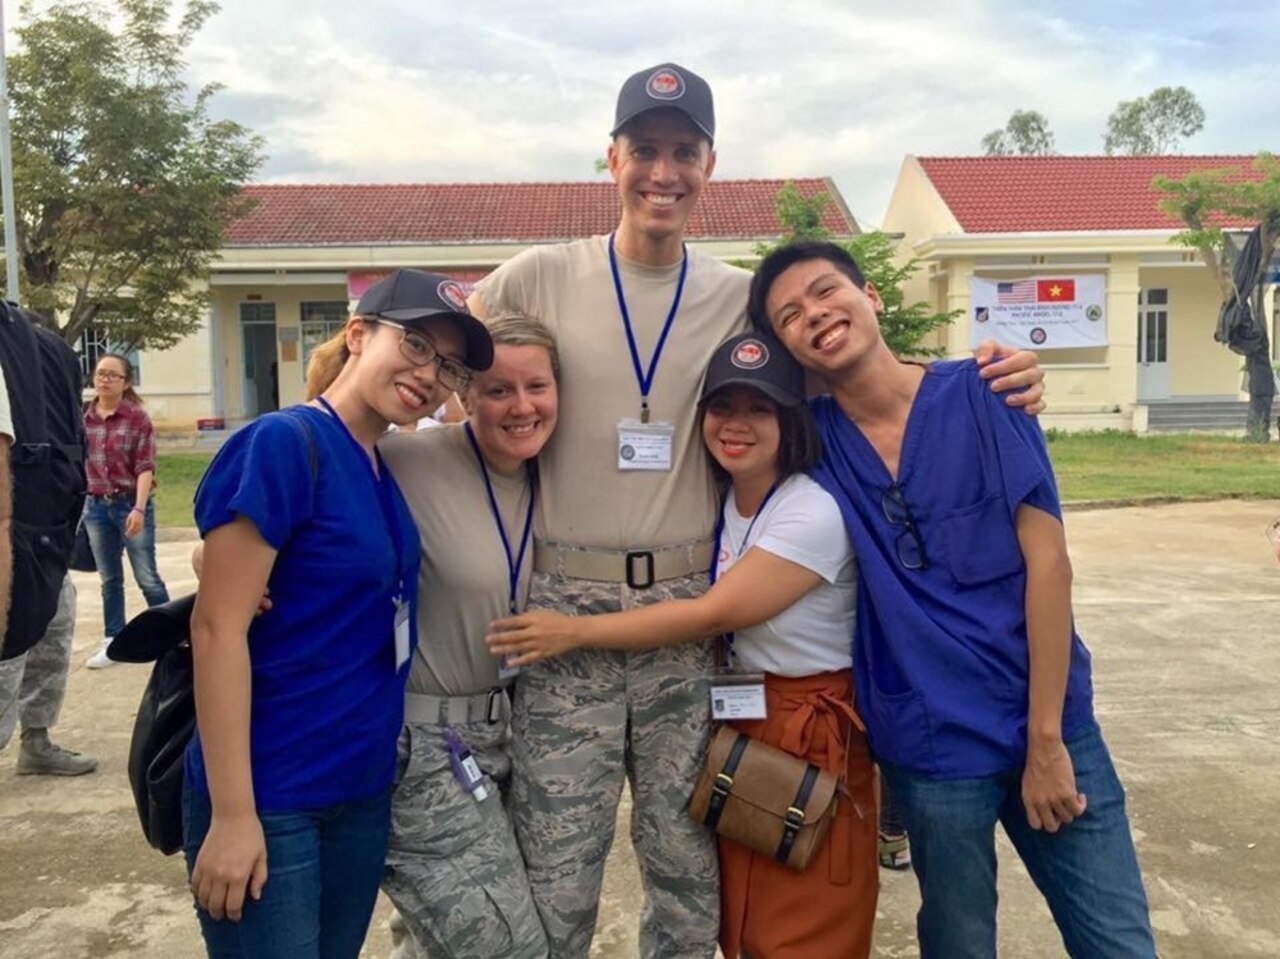 Air Force Maj. (Dr.) Cody Butler, a physical therapist and commander of the 78th Medical Group Clinical Medicine Flight, poses with other members of his engagement team in Tam Ky, Quang Nam Province, Vietnam, Nov. 30, 2017. Butler was in Vietnam as part of a team seeing patients and building relationships with local physicians during the humanitarian assistance engagement Operation Pacific Angel Vietnam 2017. Air Force photo by Jonathan Bell